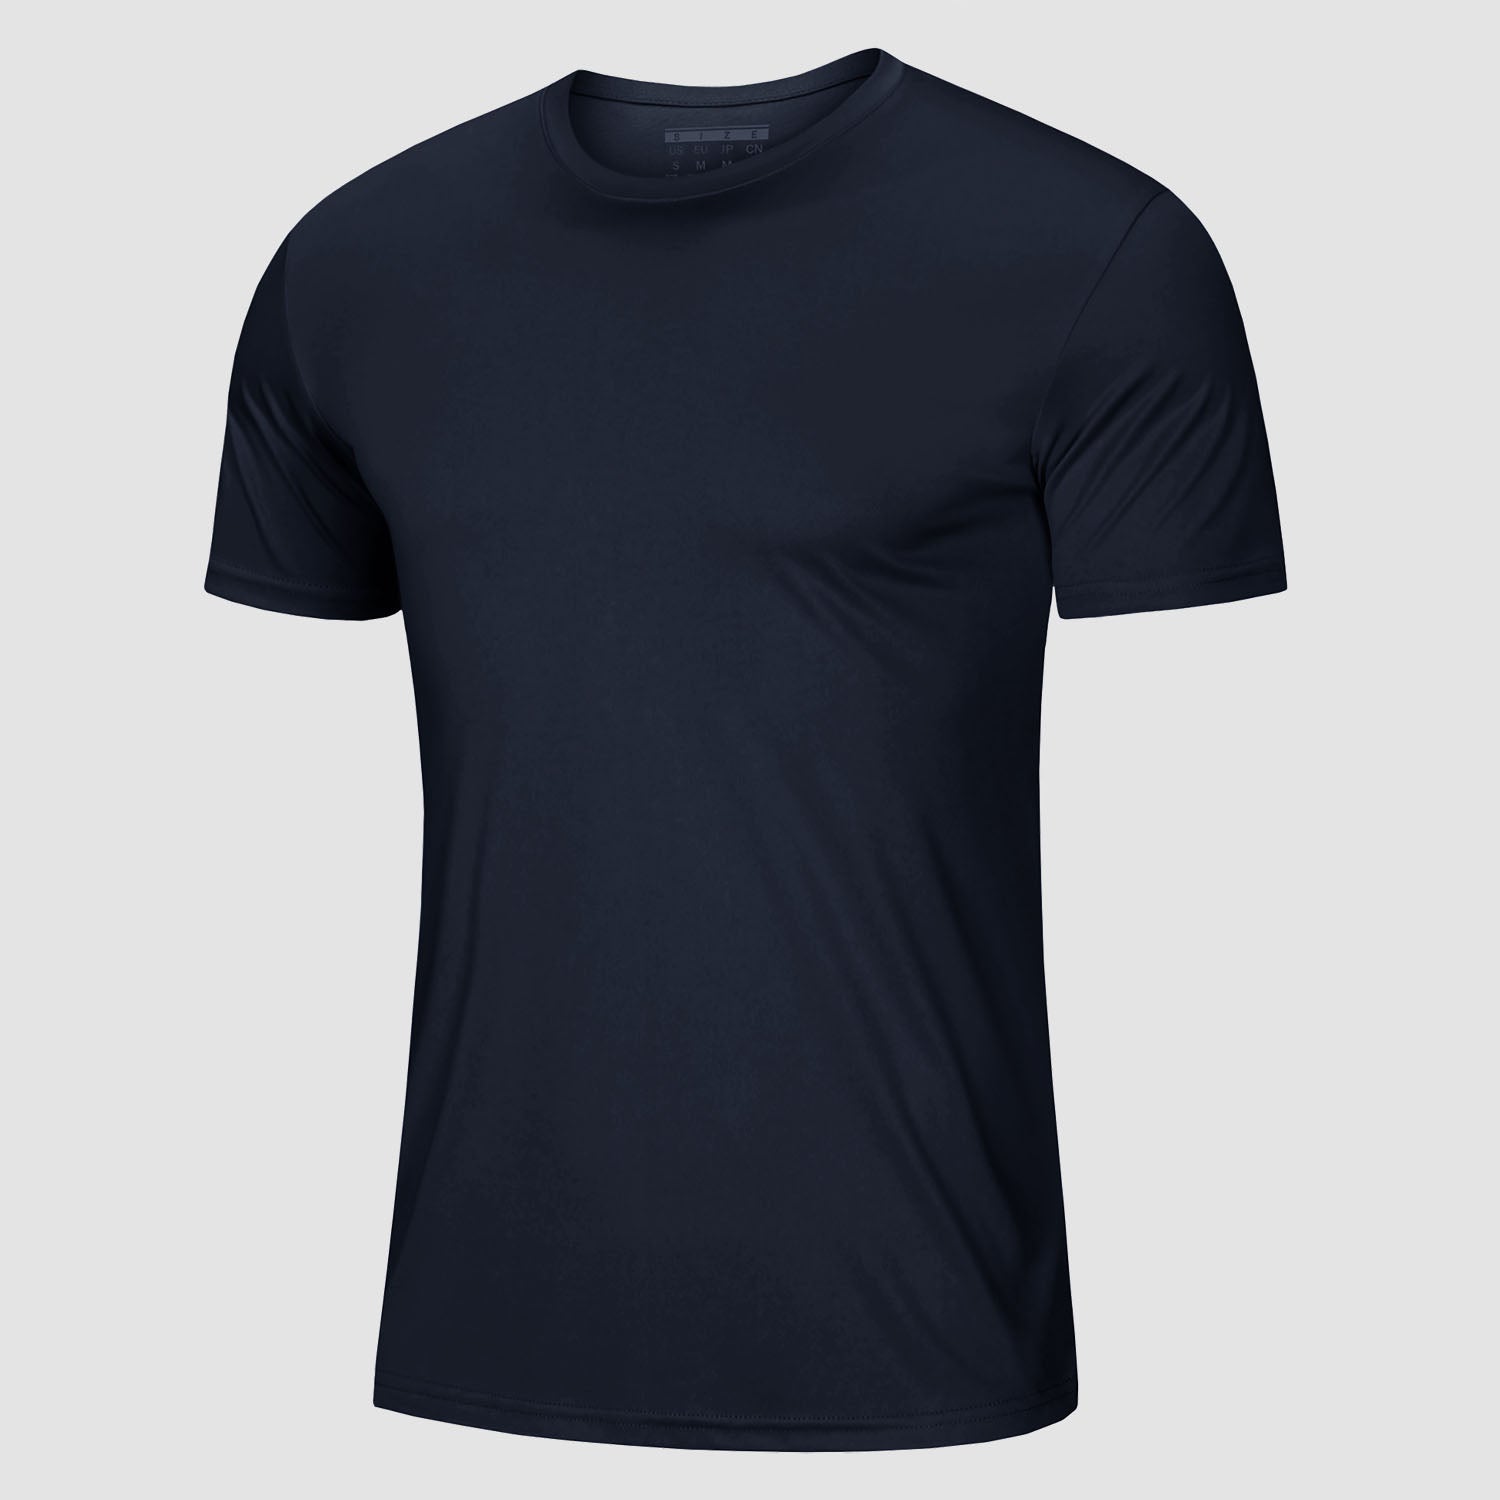 Men's Quick Dry T-Shirts UPF 50+ Athletic Running Workout Tee Shirts